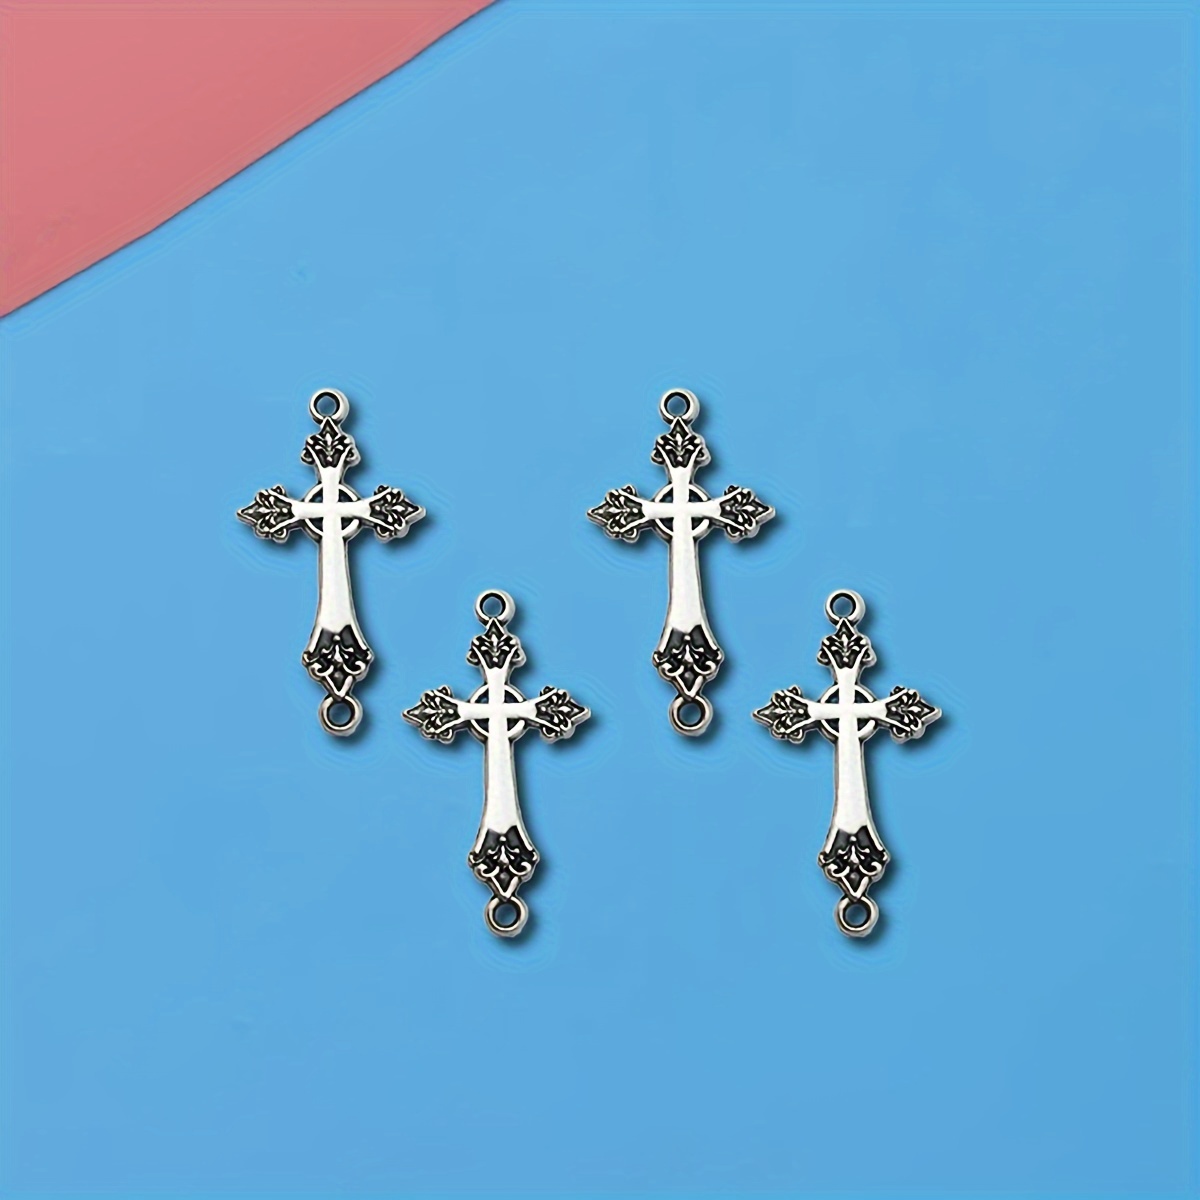 LGFMGWH 60Pack Small Wooden Crosses in Bulk, Wooden Crosses for Crafts, Cross Charms with 60 Chains, Wooden Cross Pendants for Necklace Bracelet